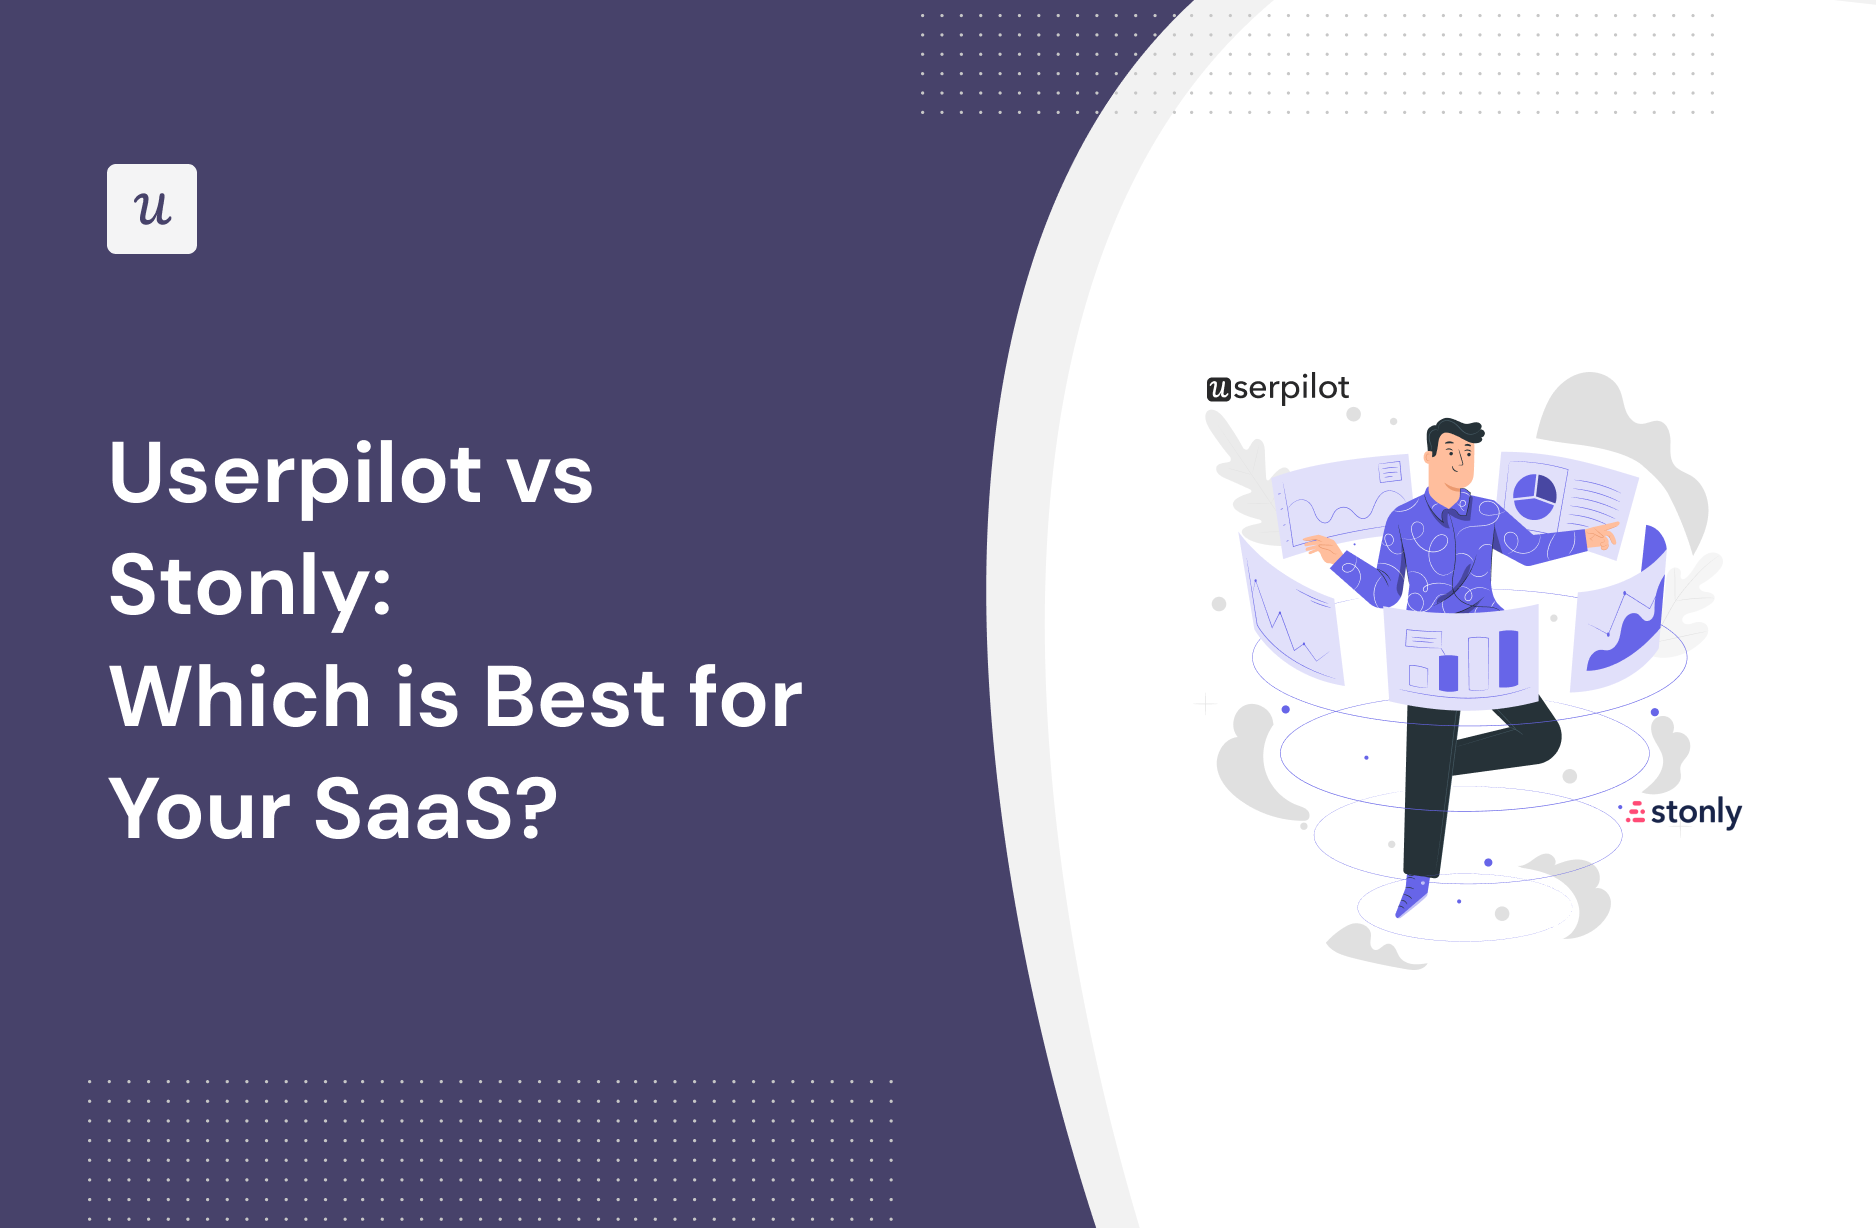 Userpilot vs Stonly: Which Is Best for Your SaaS?